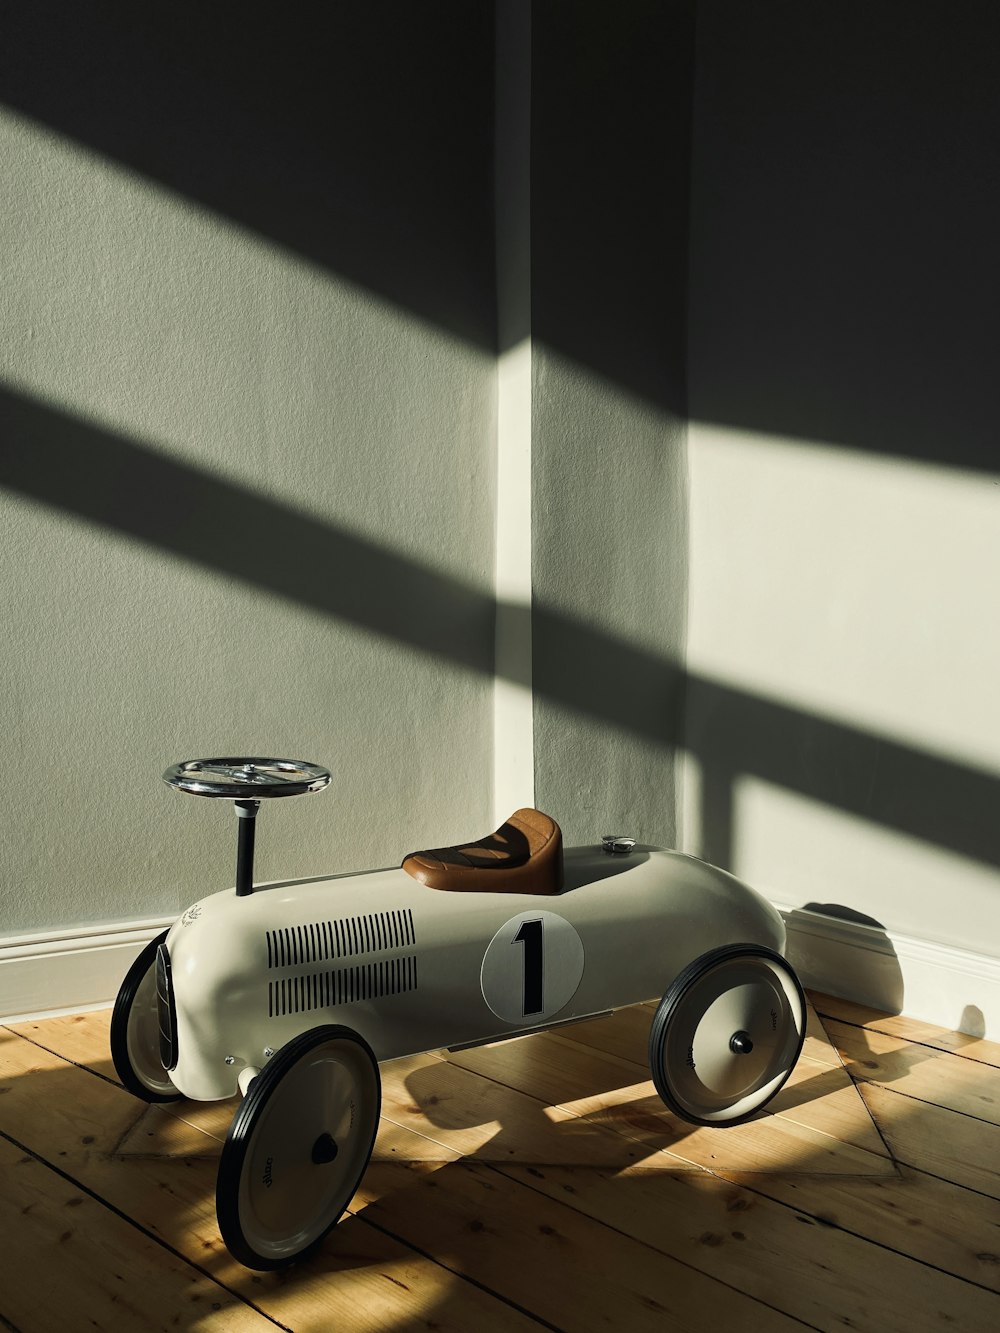 a toy car sitting on top of a wooden floor